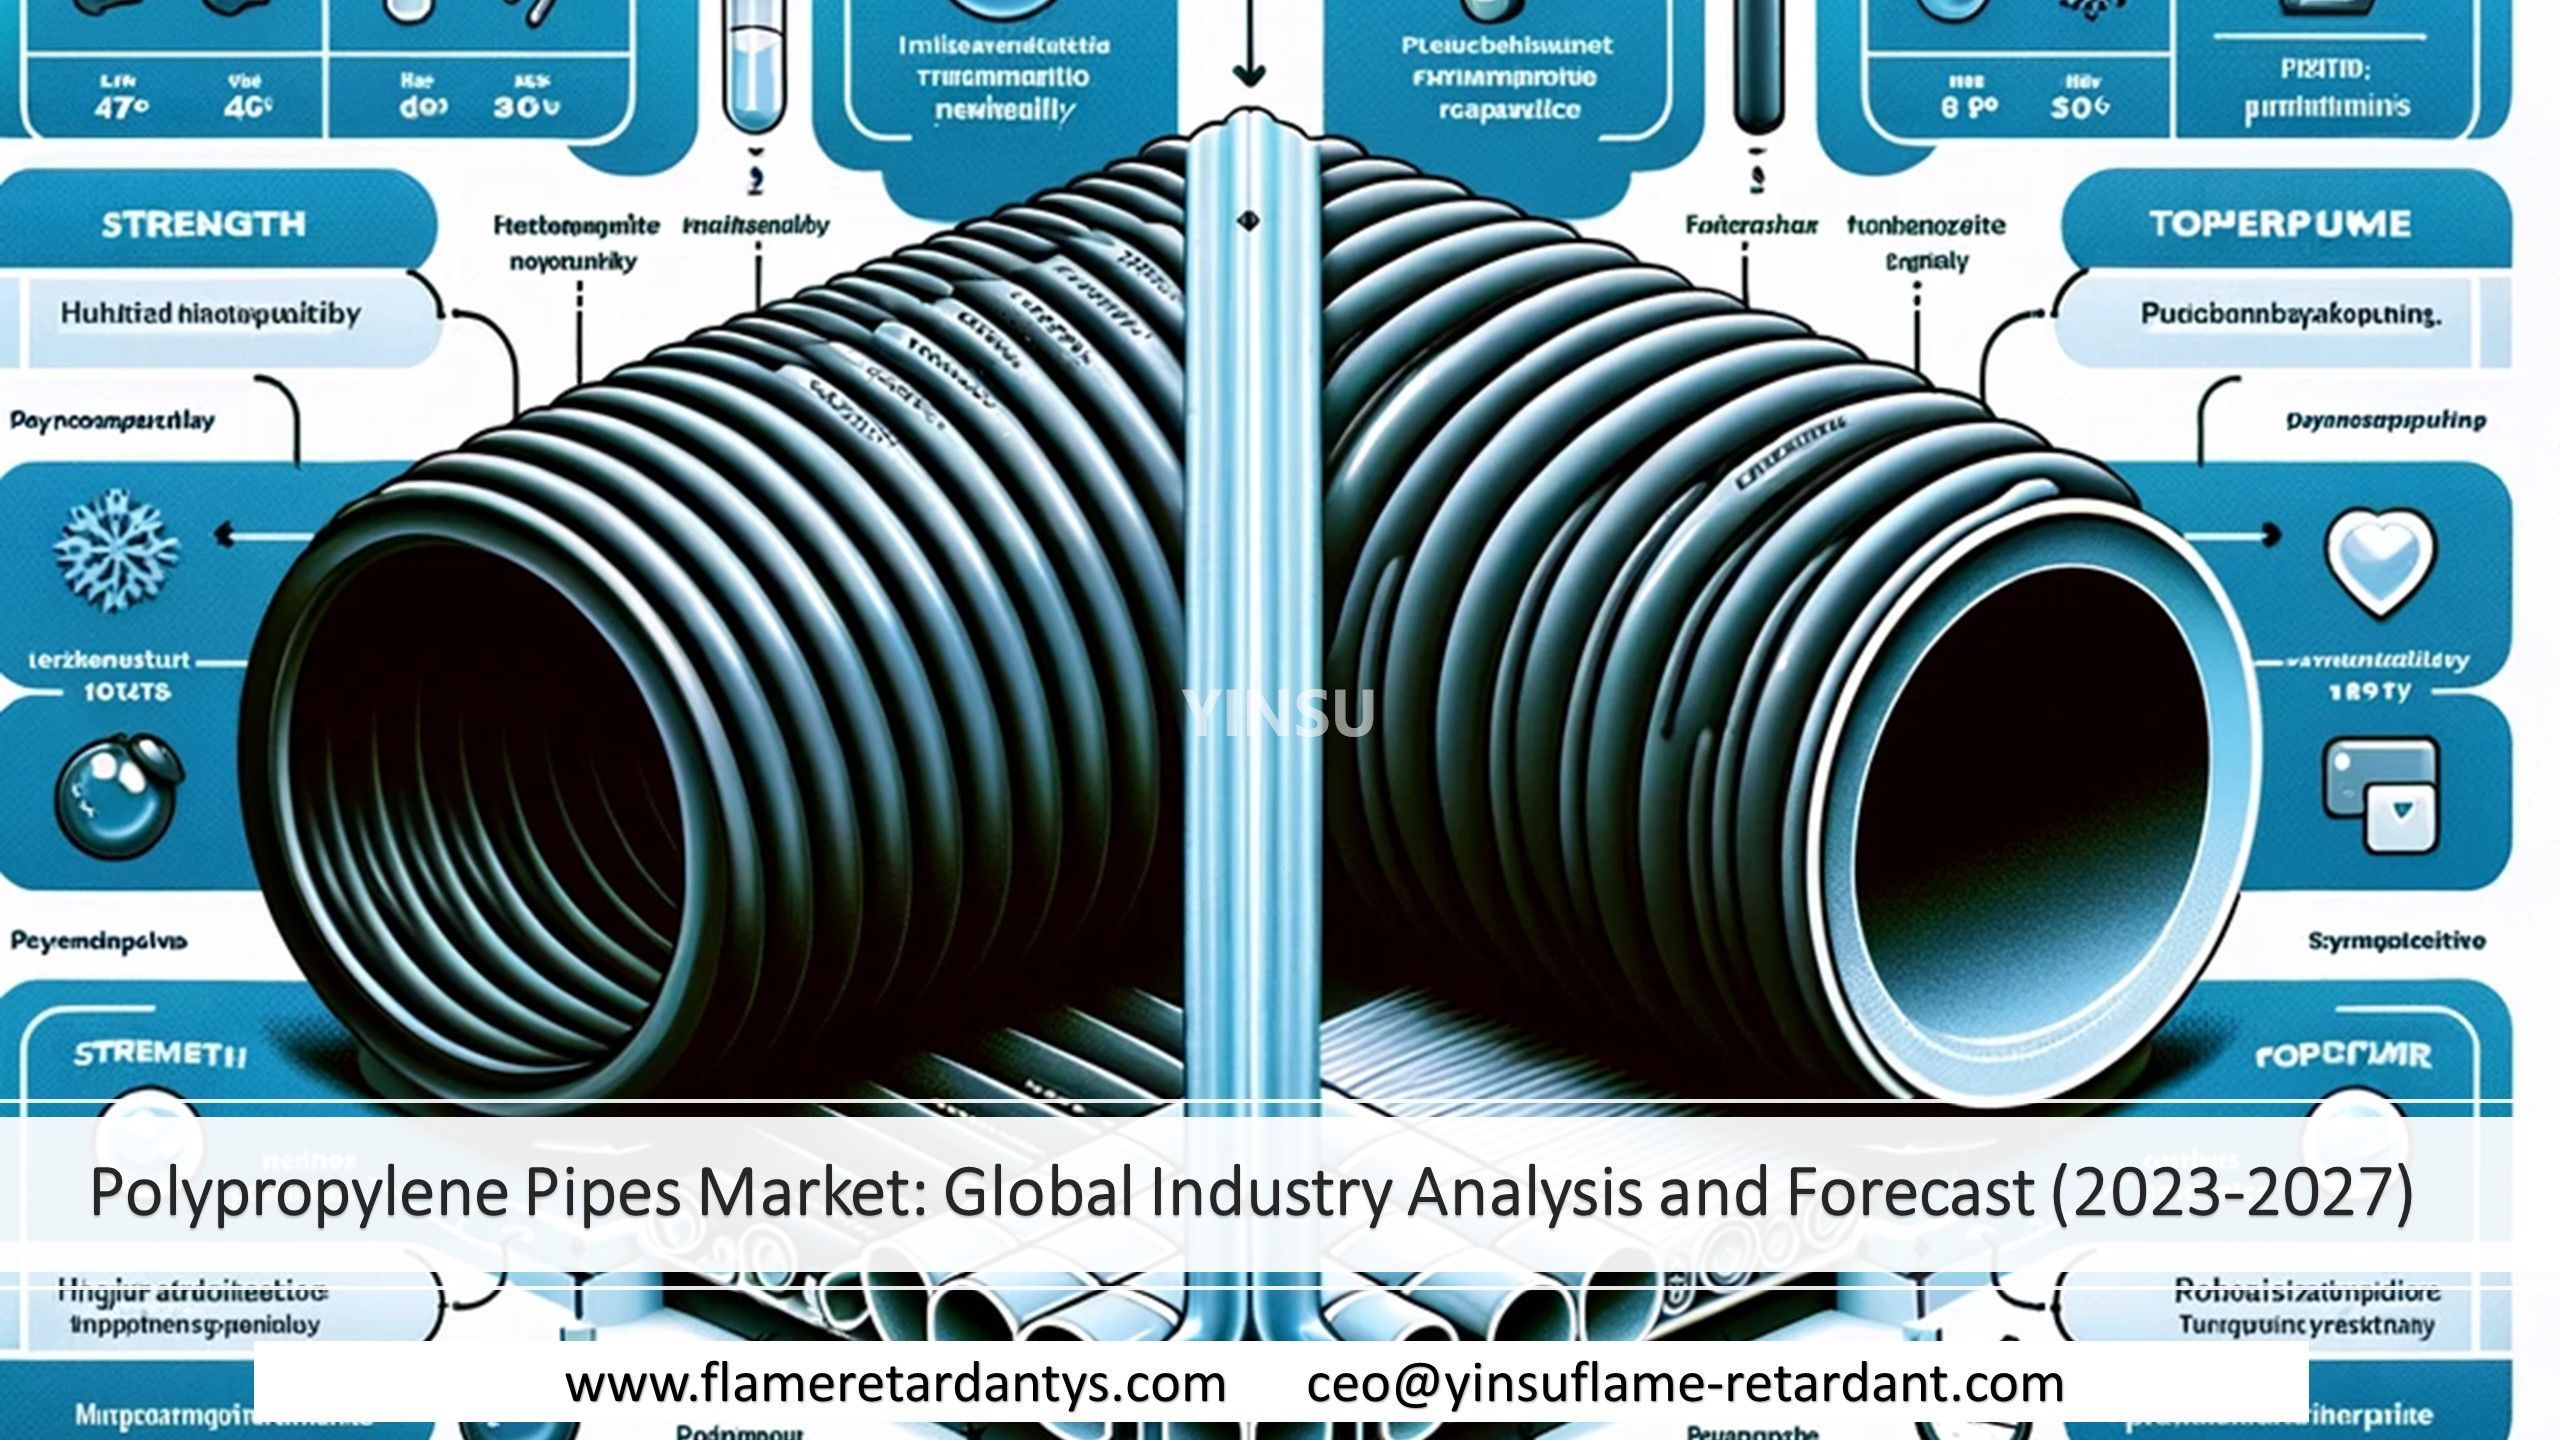 Polypropylene Pipes Market Global Industry Analysis and Forecast (2023-2027)